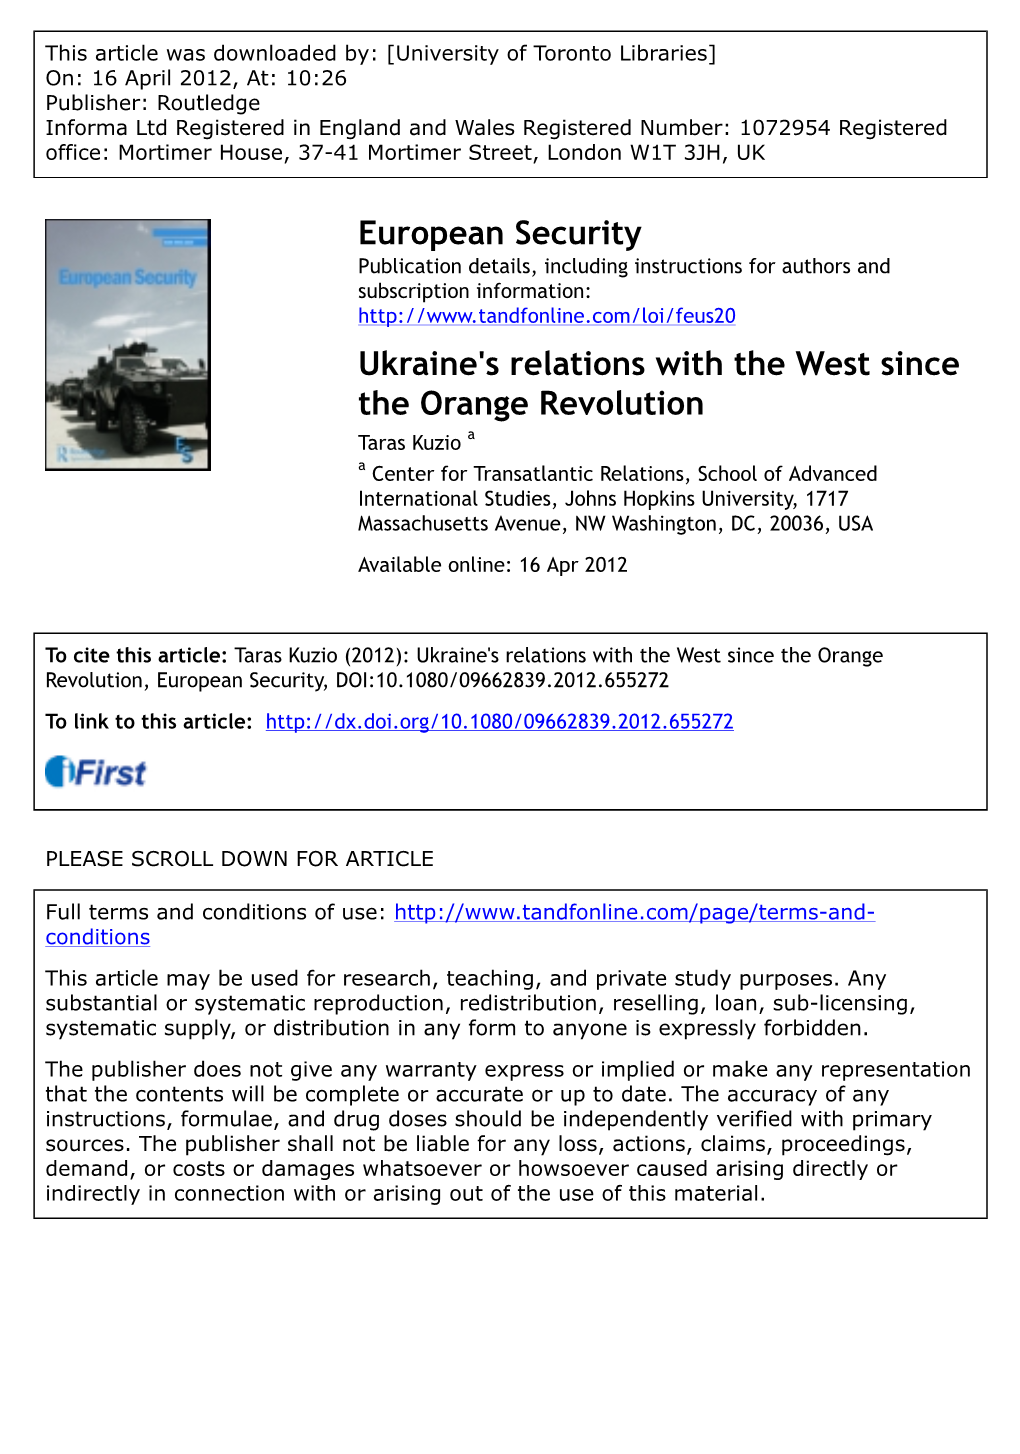 Ukraine's Relations with the West Since the Orange